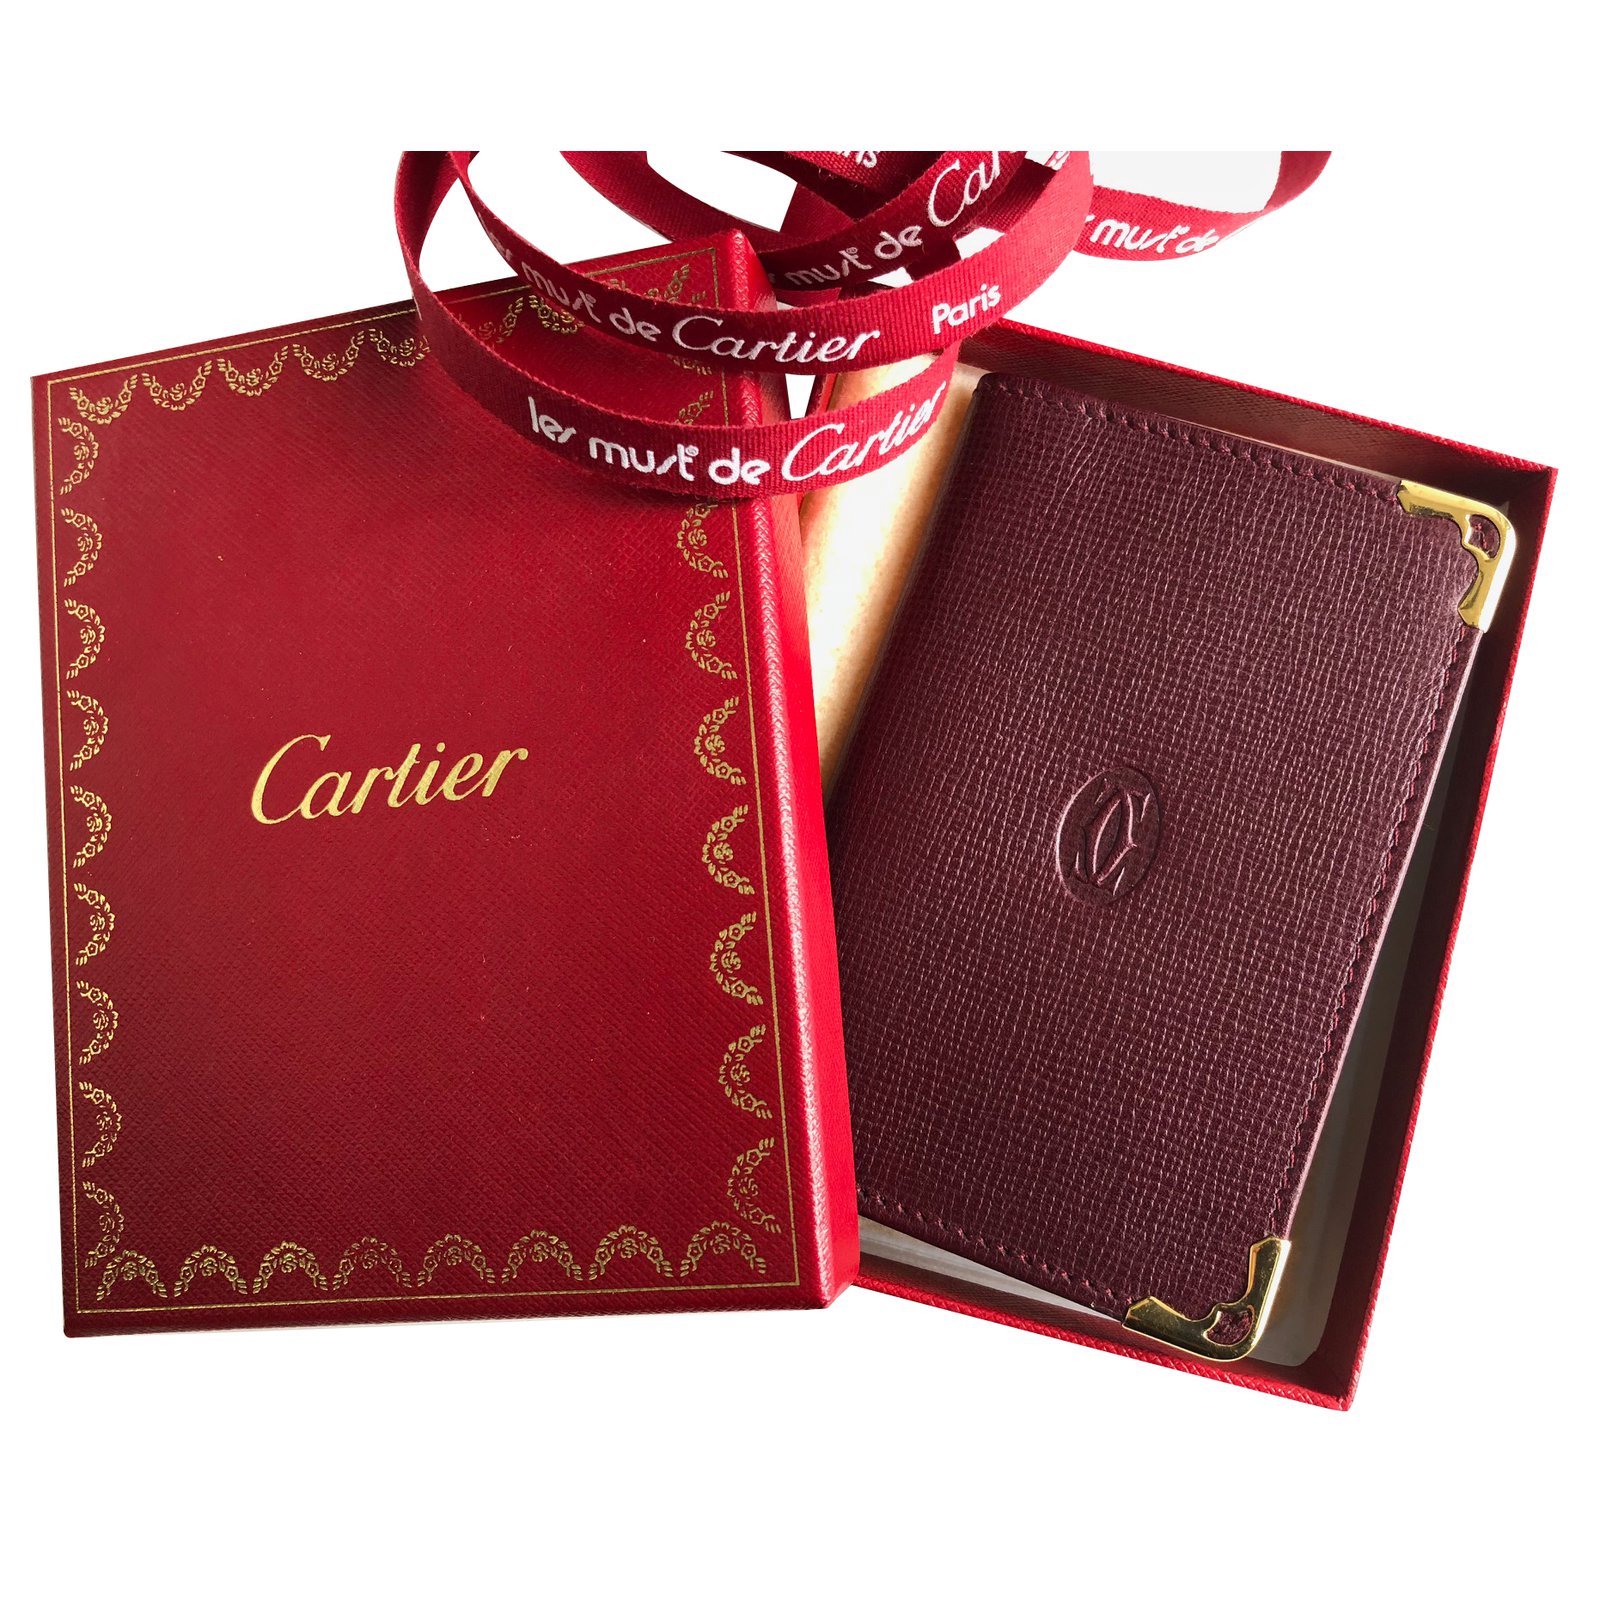 cartier red leather wallet